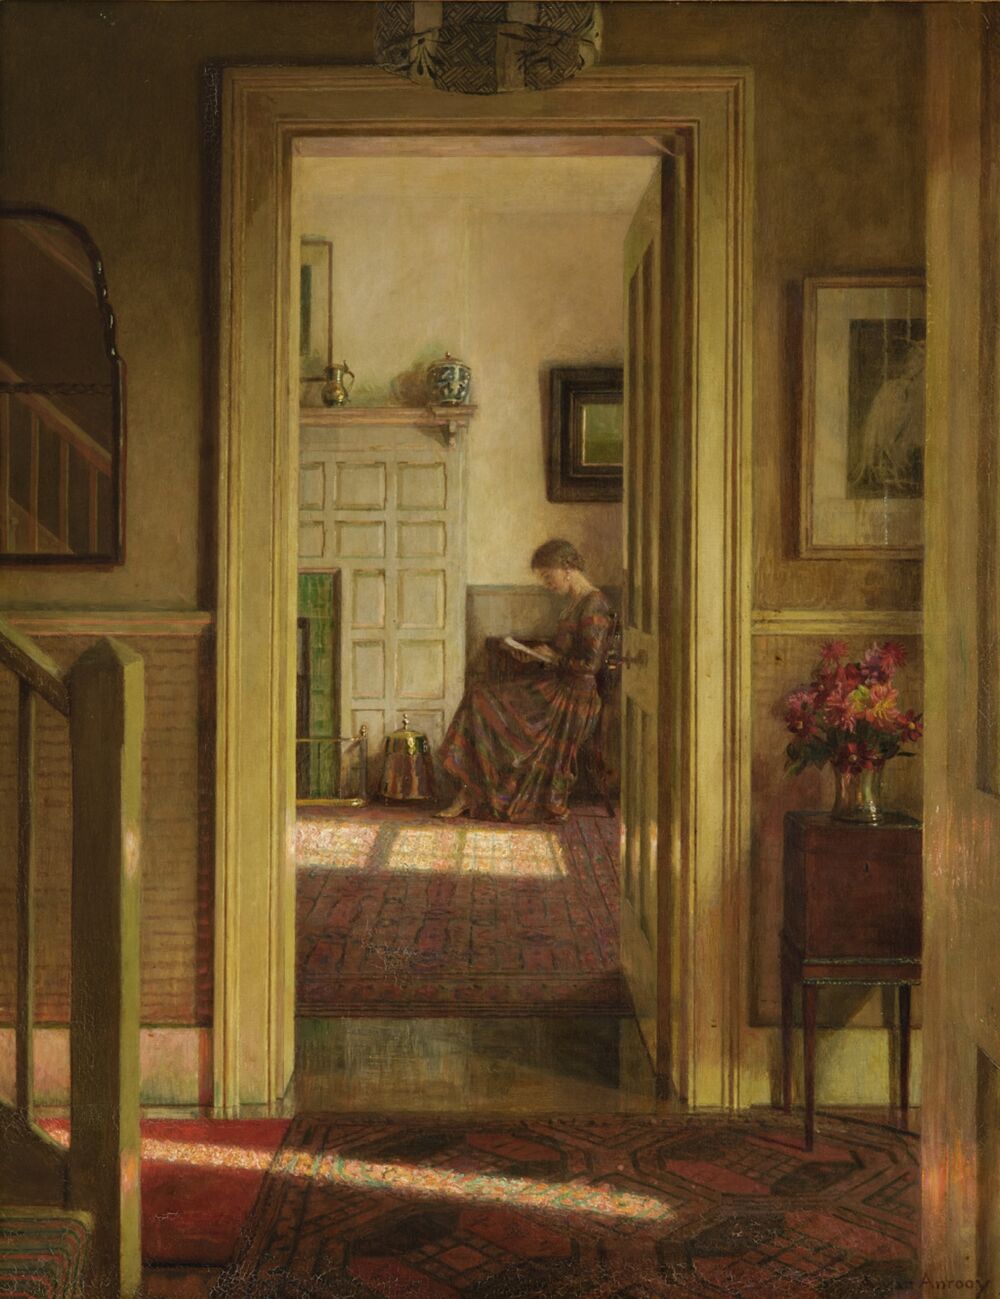 An oil painting of a young woman shown immersed in a book. She is sitting by a fireplace, and is viewed through an open doorway from across a hall.